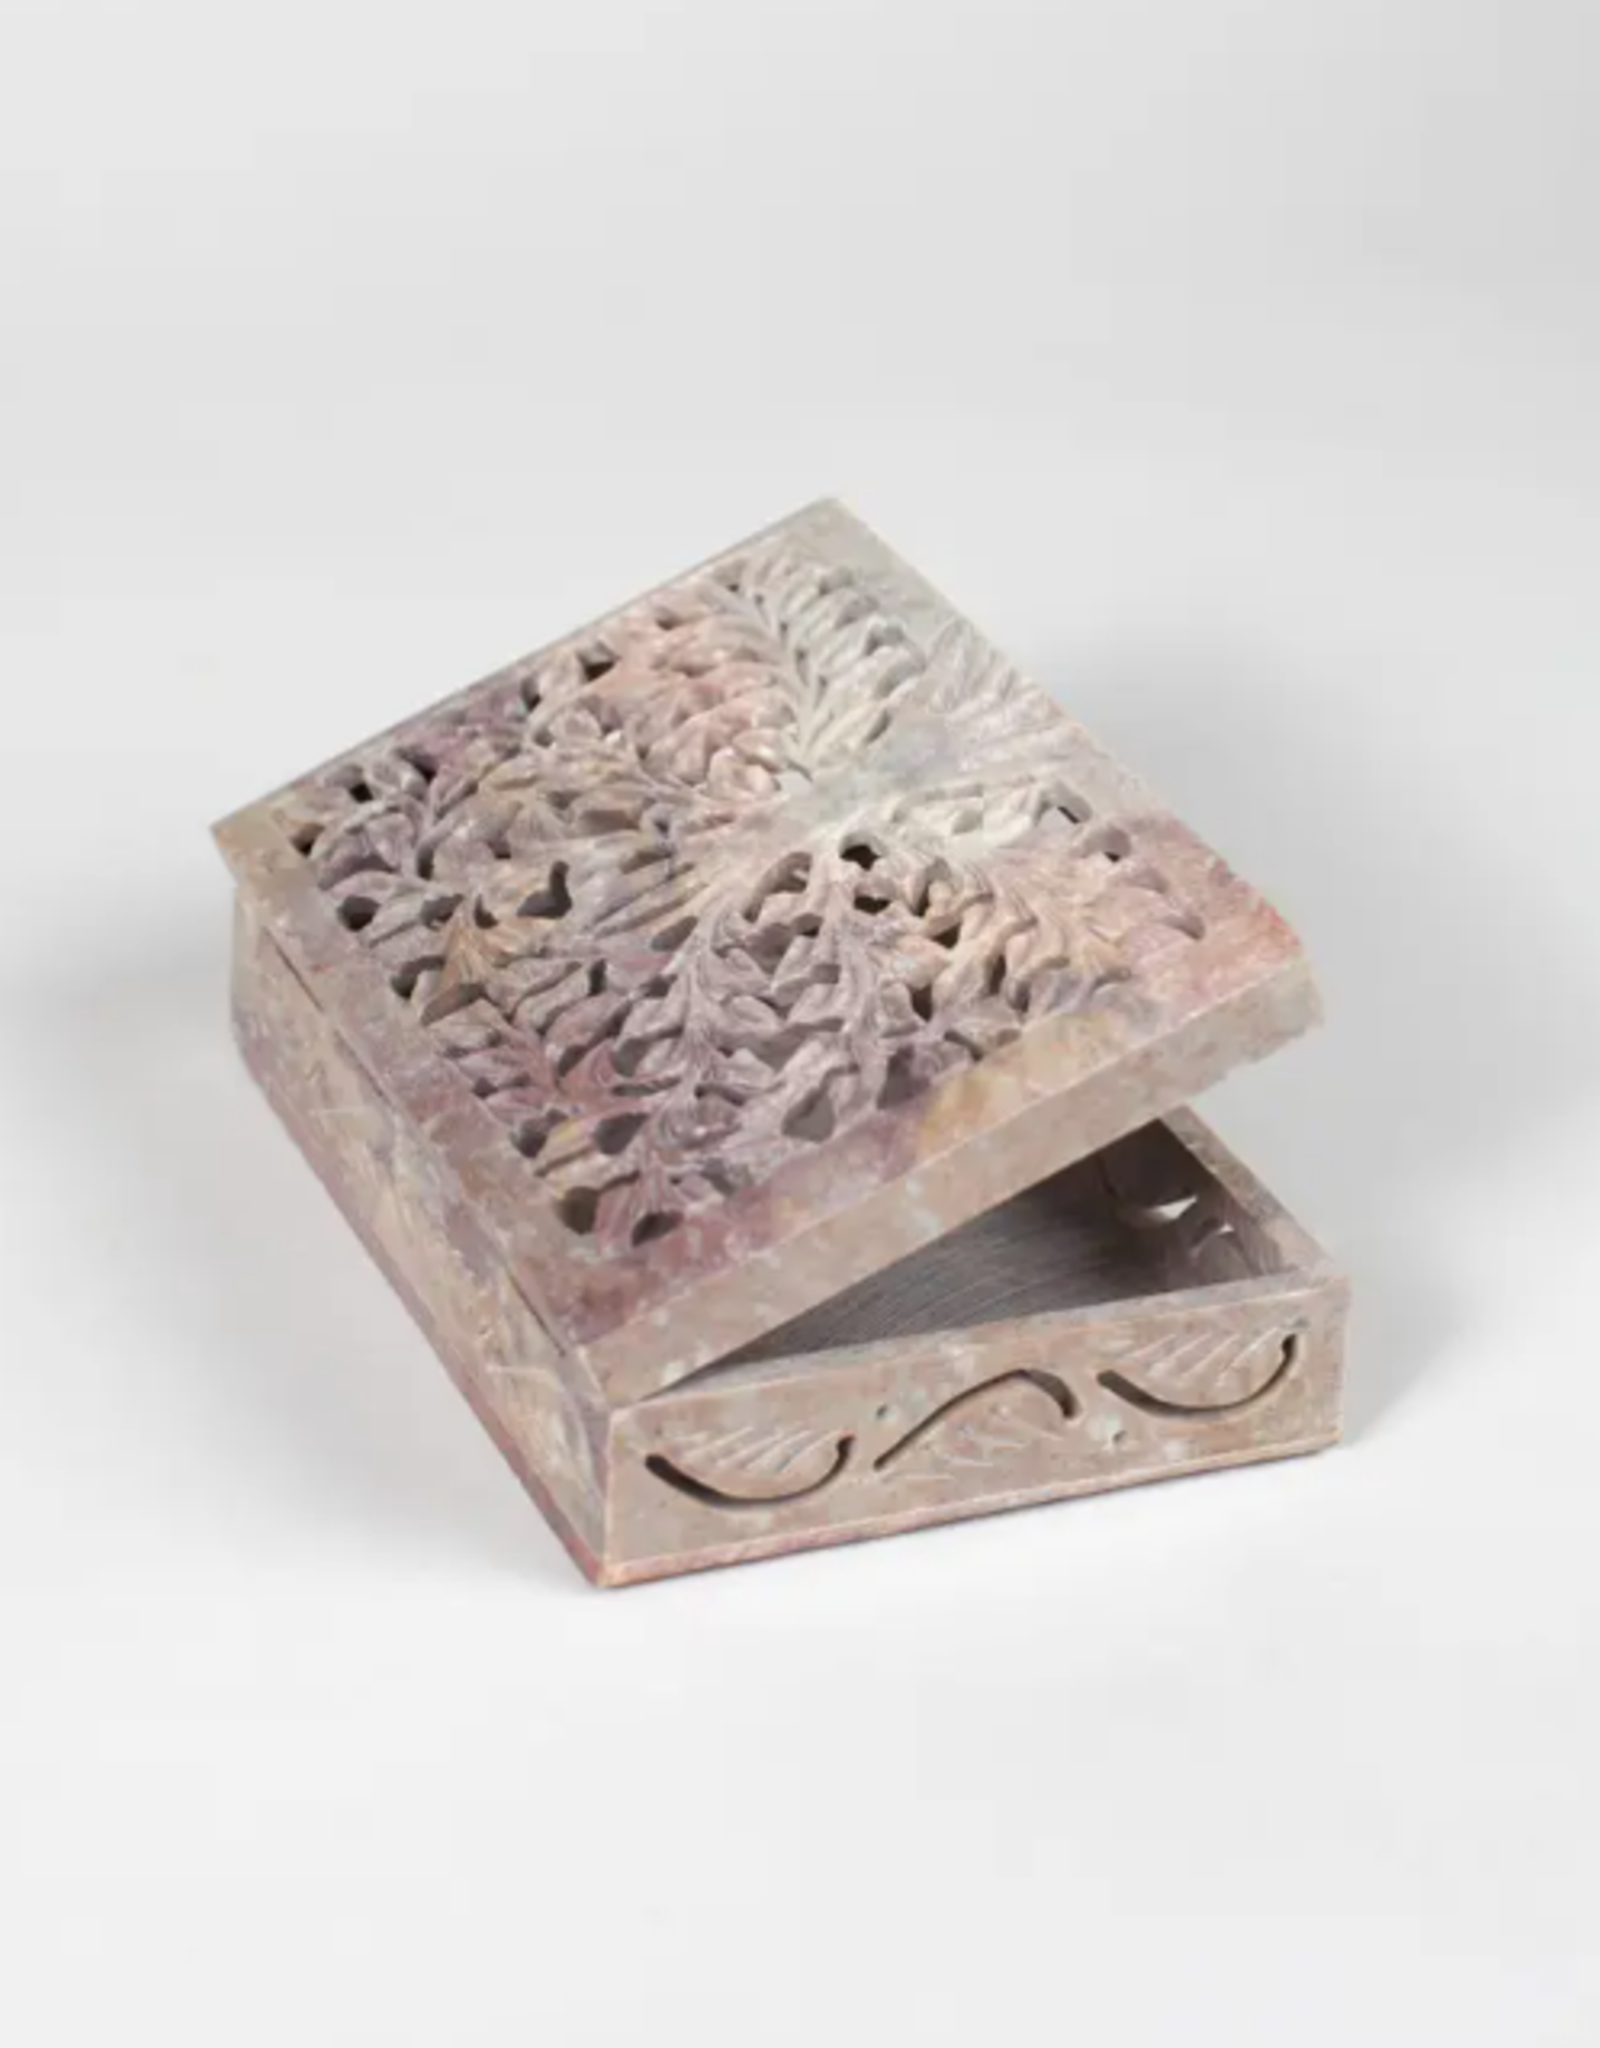 Ten Thousand Villages Hand-Carved Tree Box